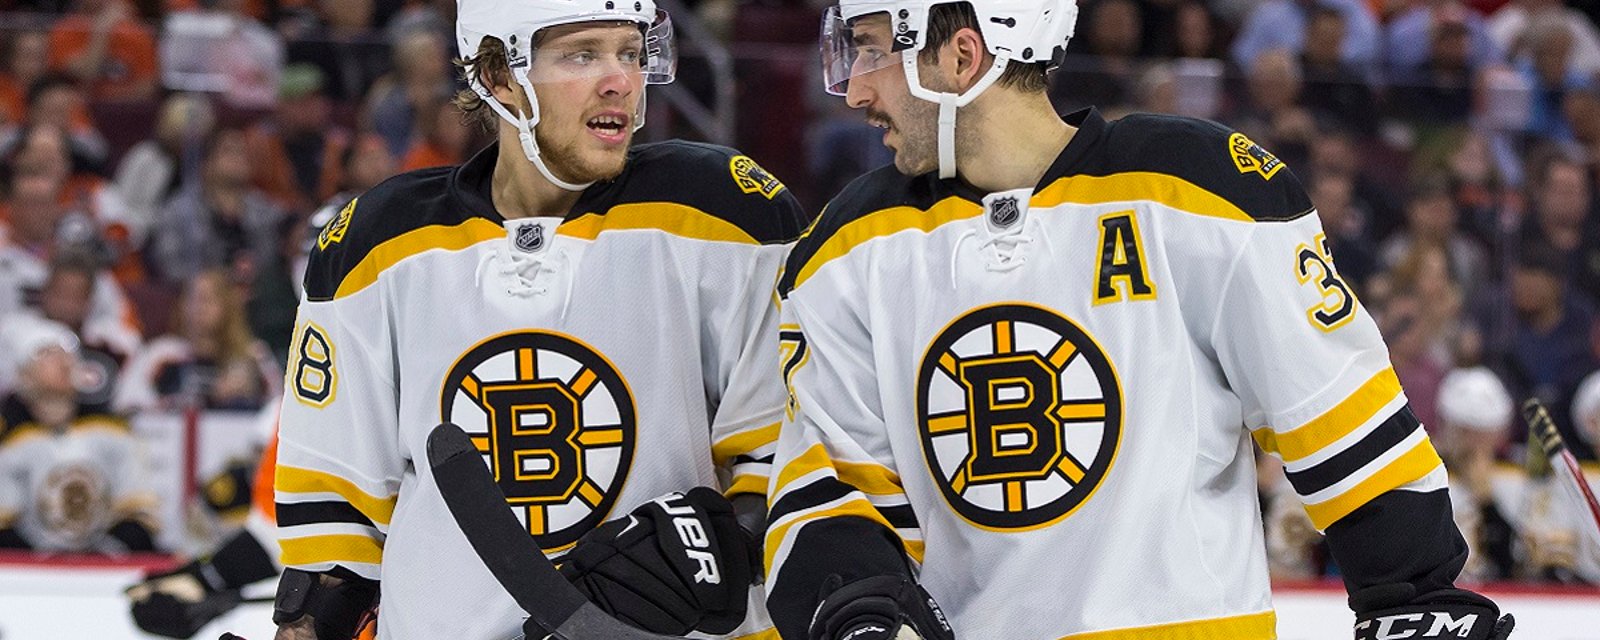 Bruins star Patrice Bergeron comments on Pastrnak contract drama.